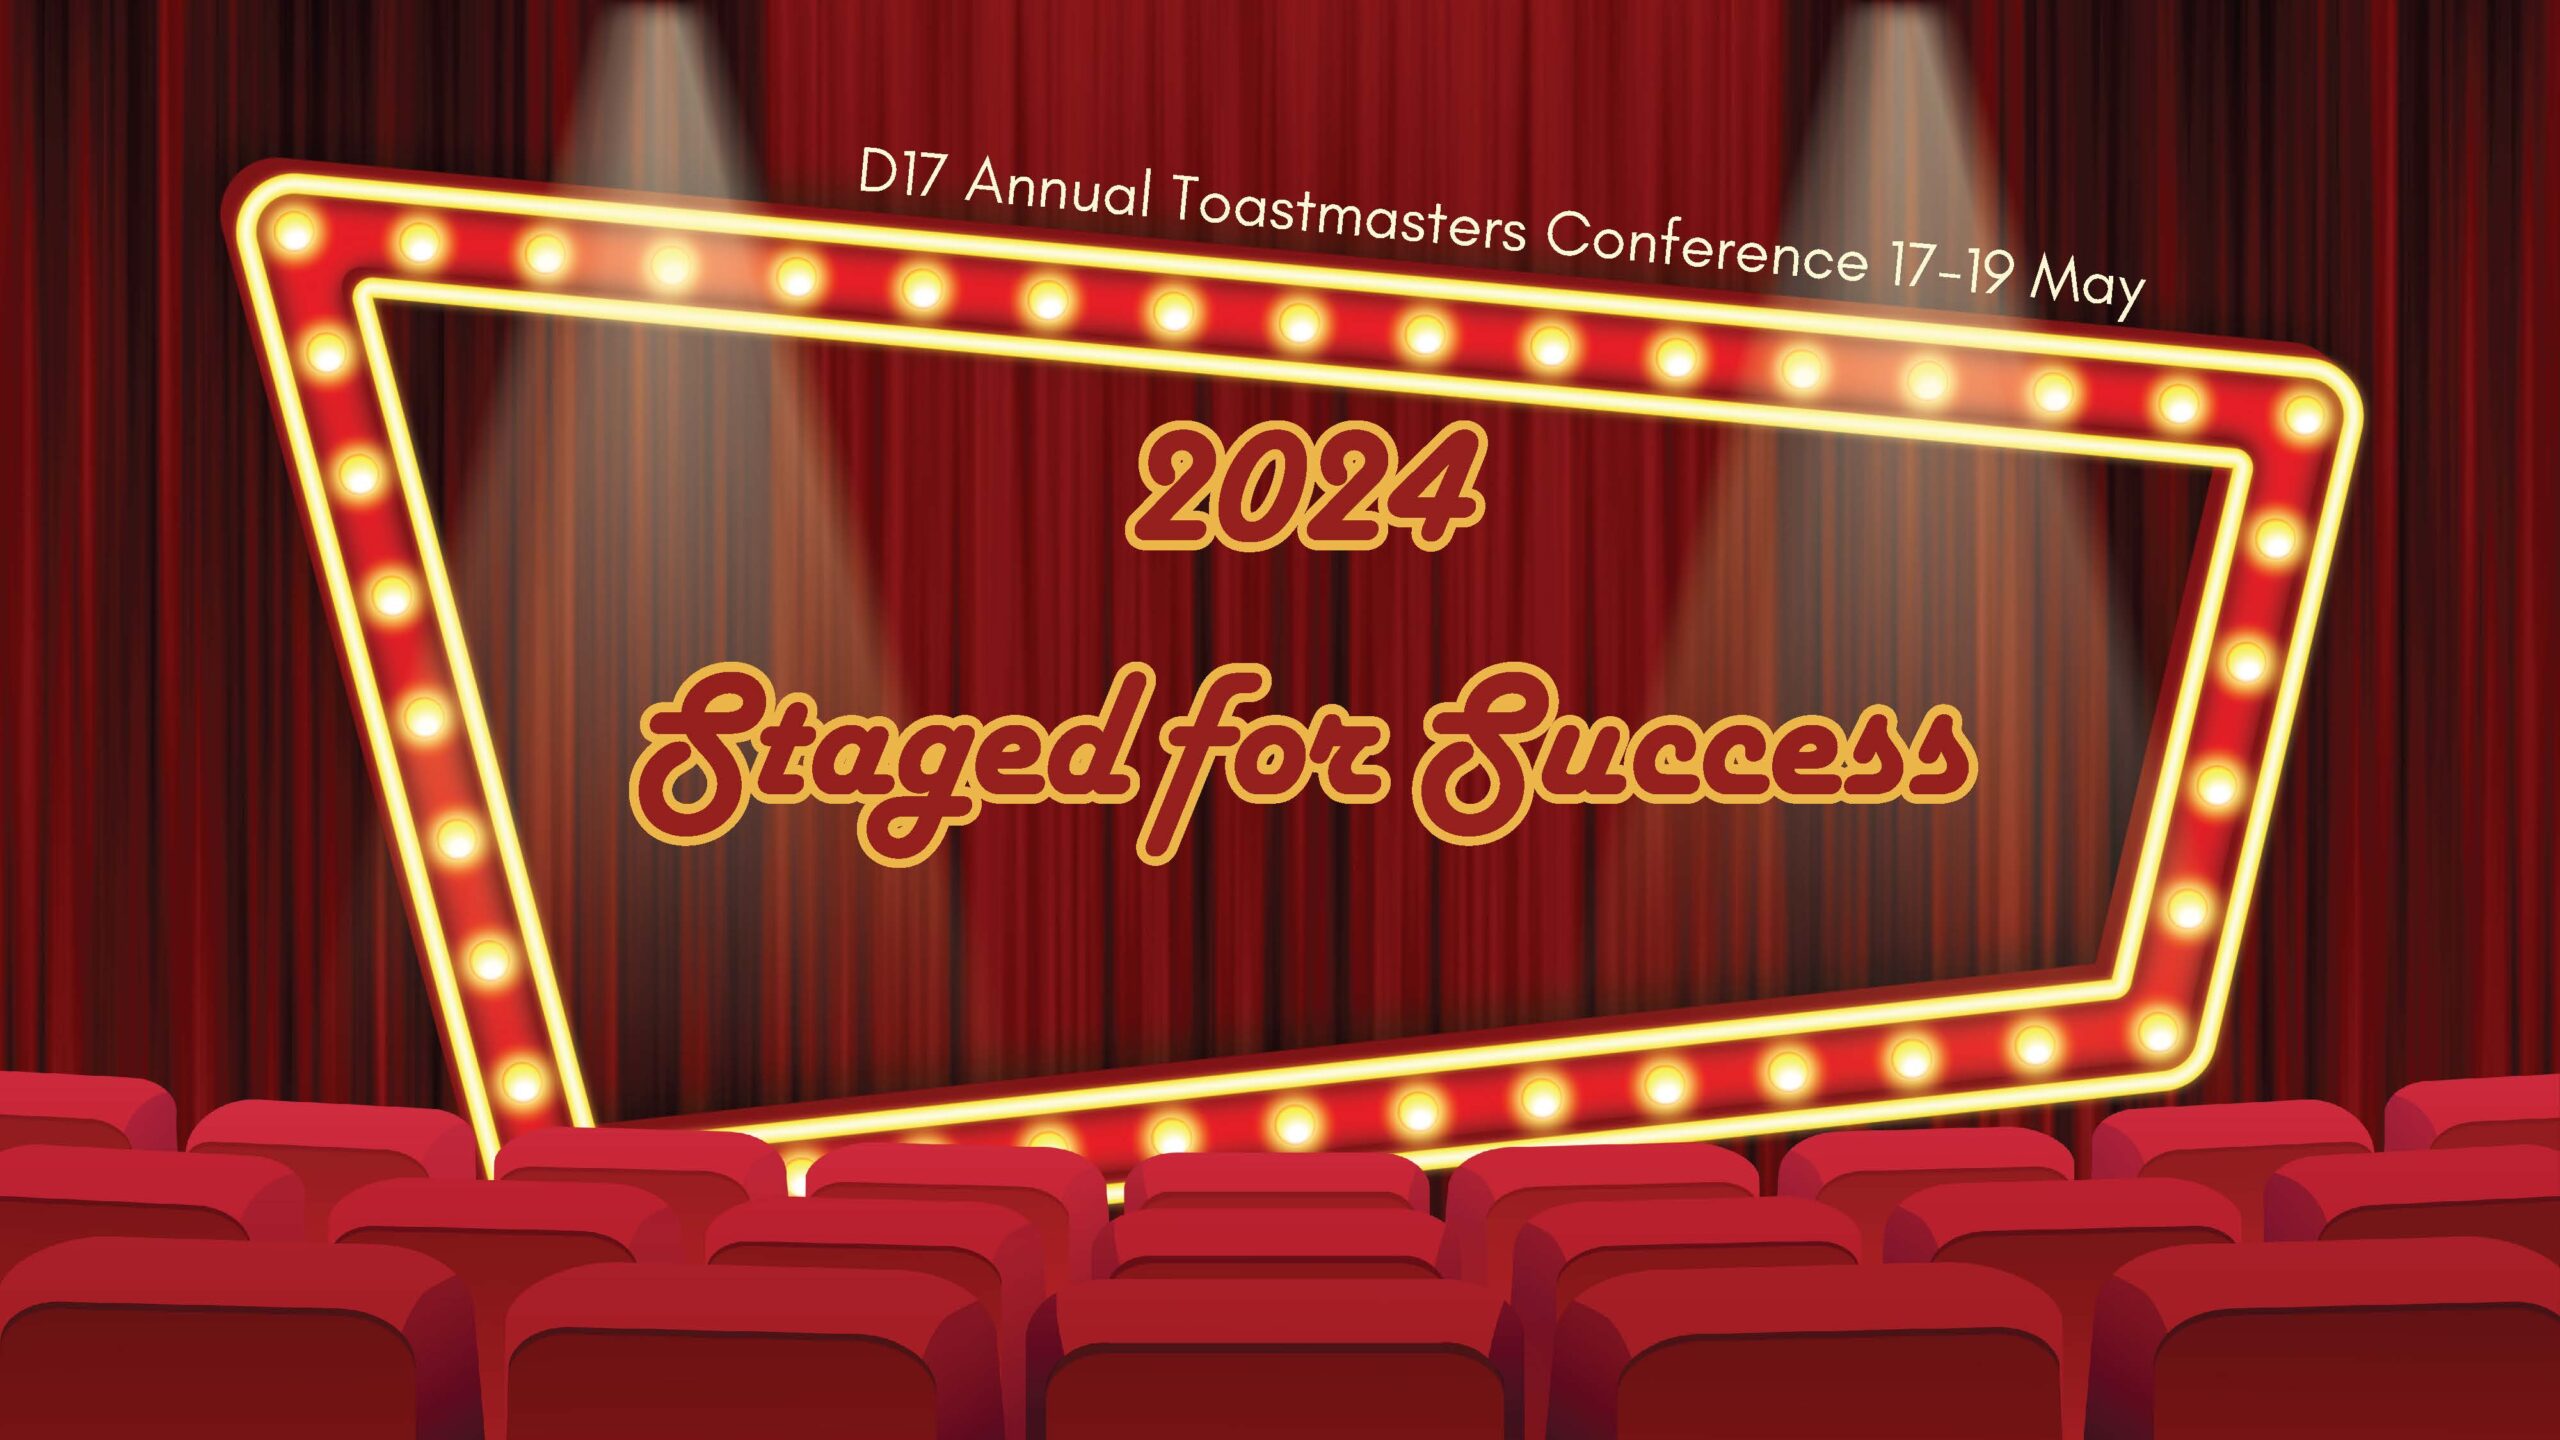 Conference 2024 - staged for success